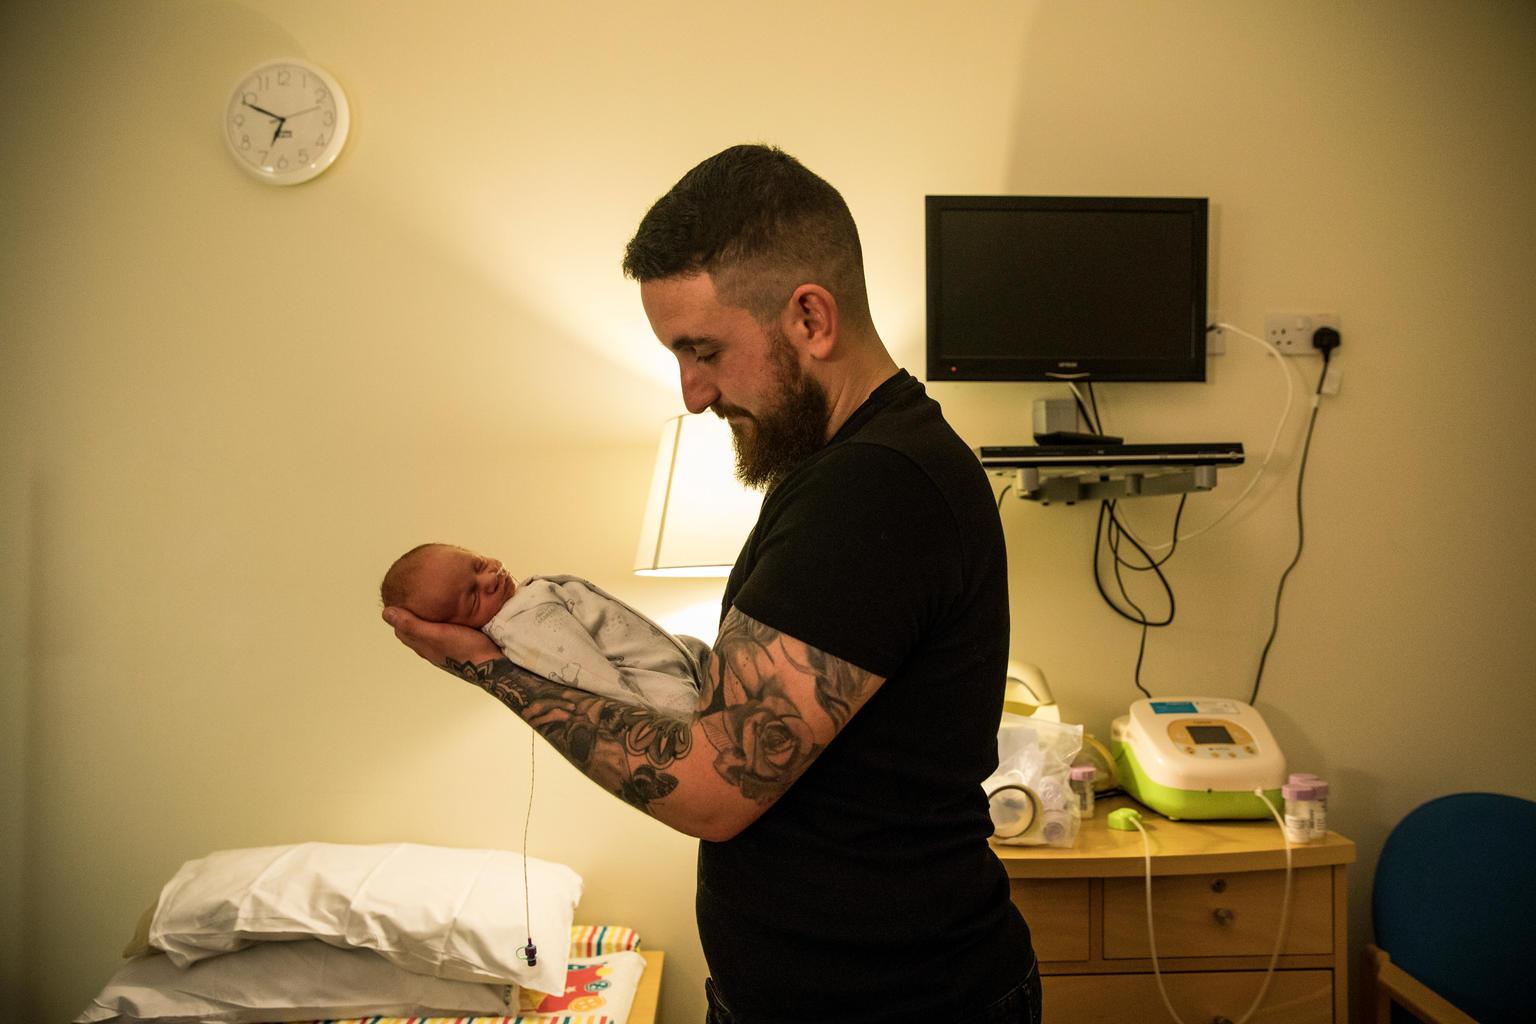 Alex Edmonds Brown holds his son Harley James, in a private room in the maternity ward of the Royal Devon and Exeter Hospital in Devon